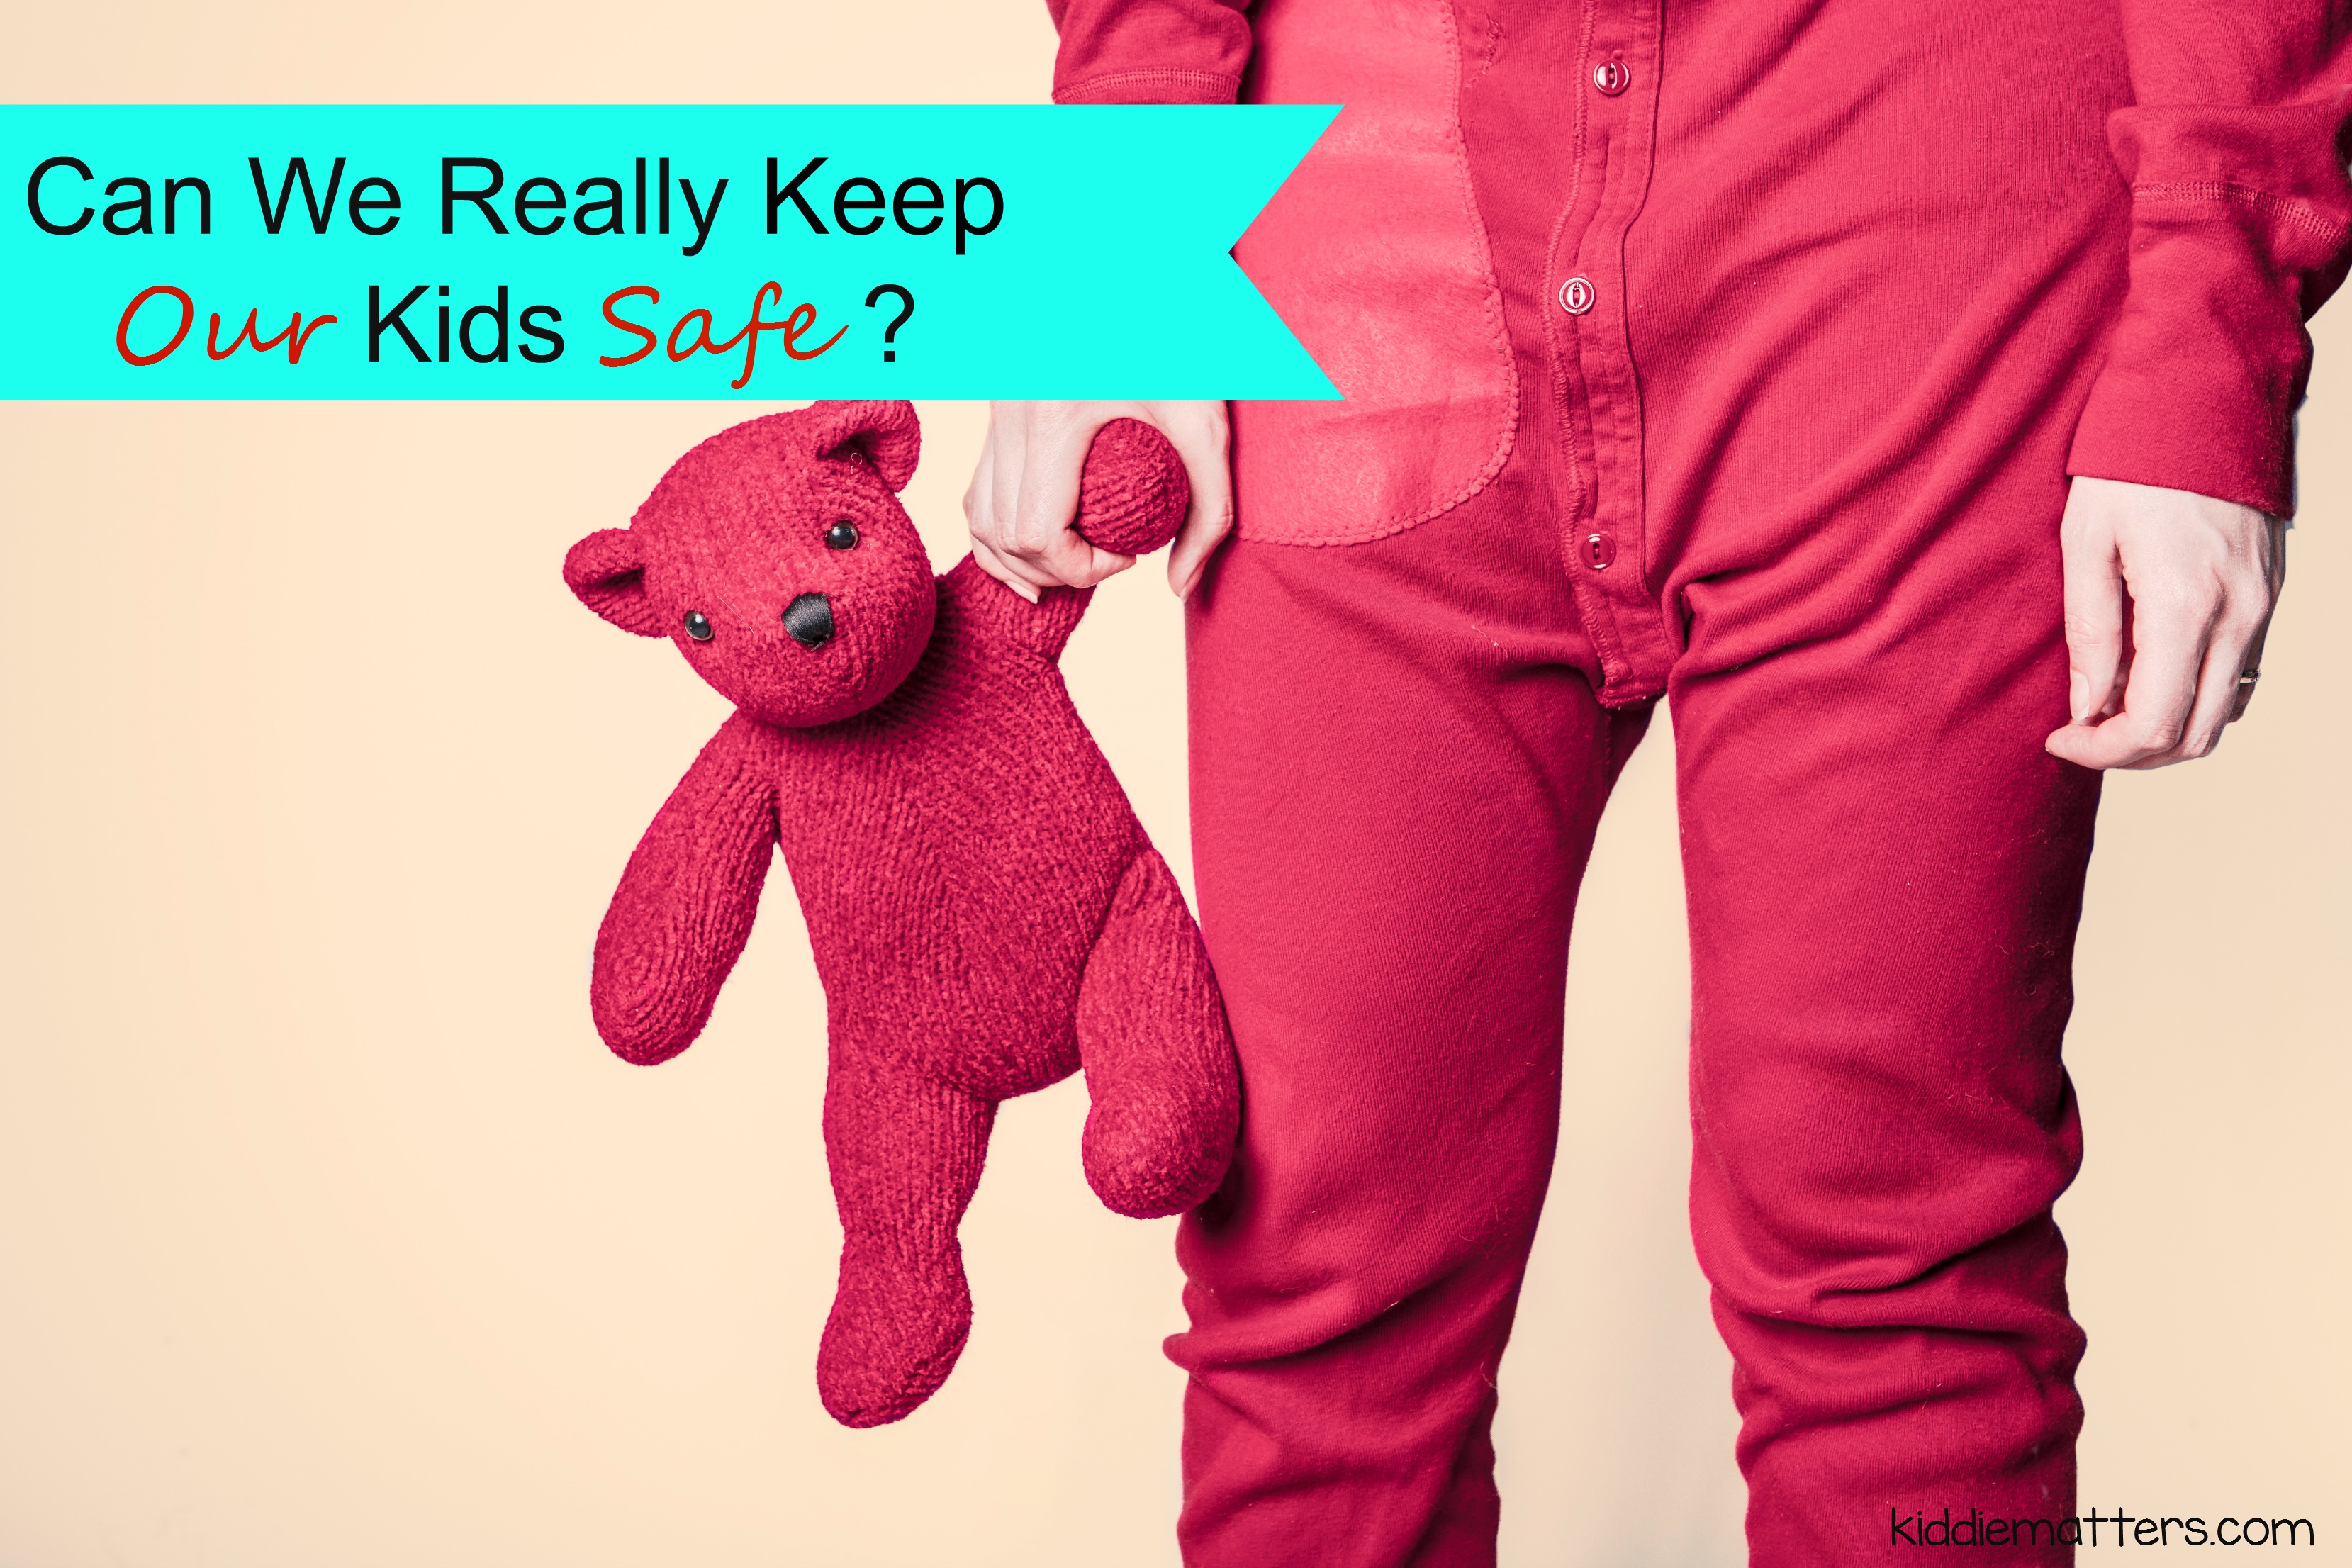 Can We Really Keep Our Kids Safe?